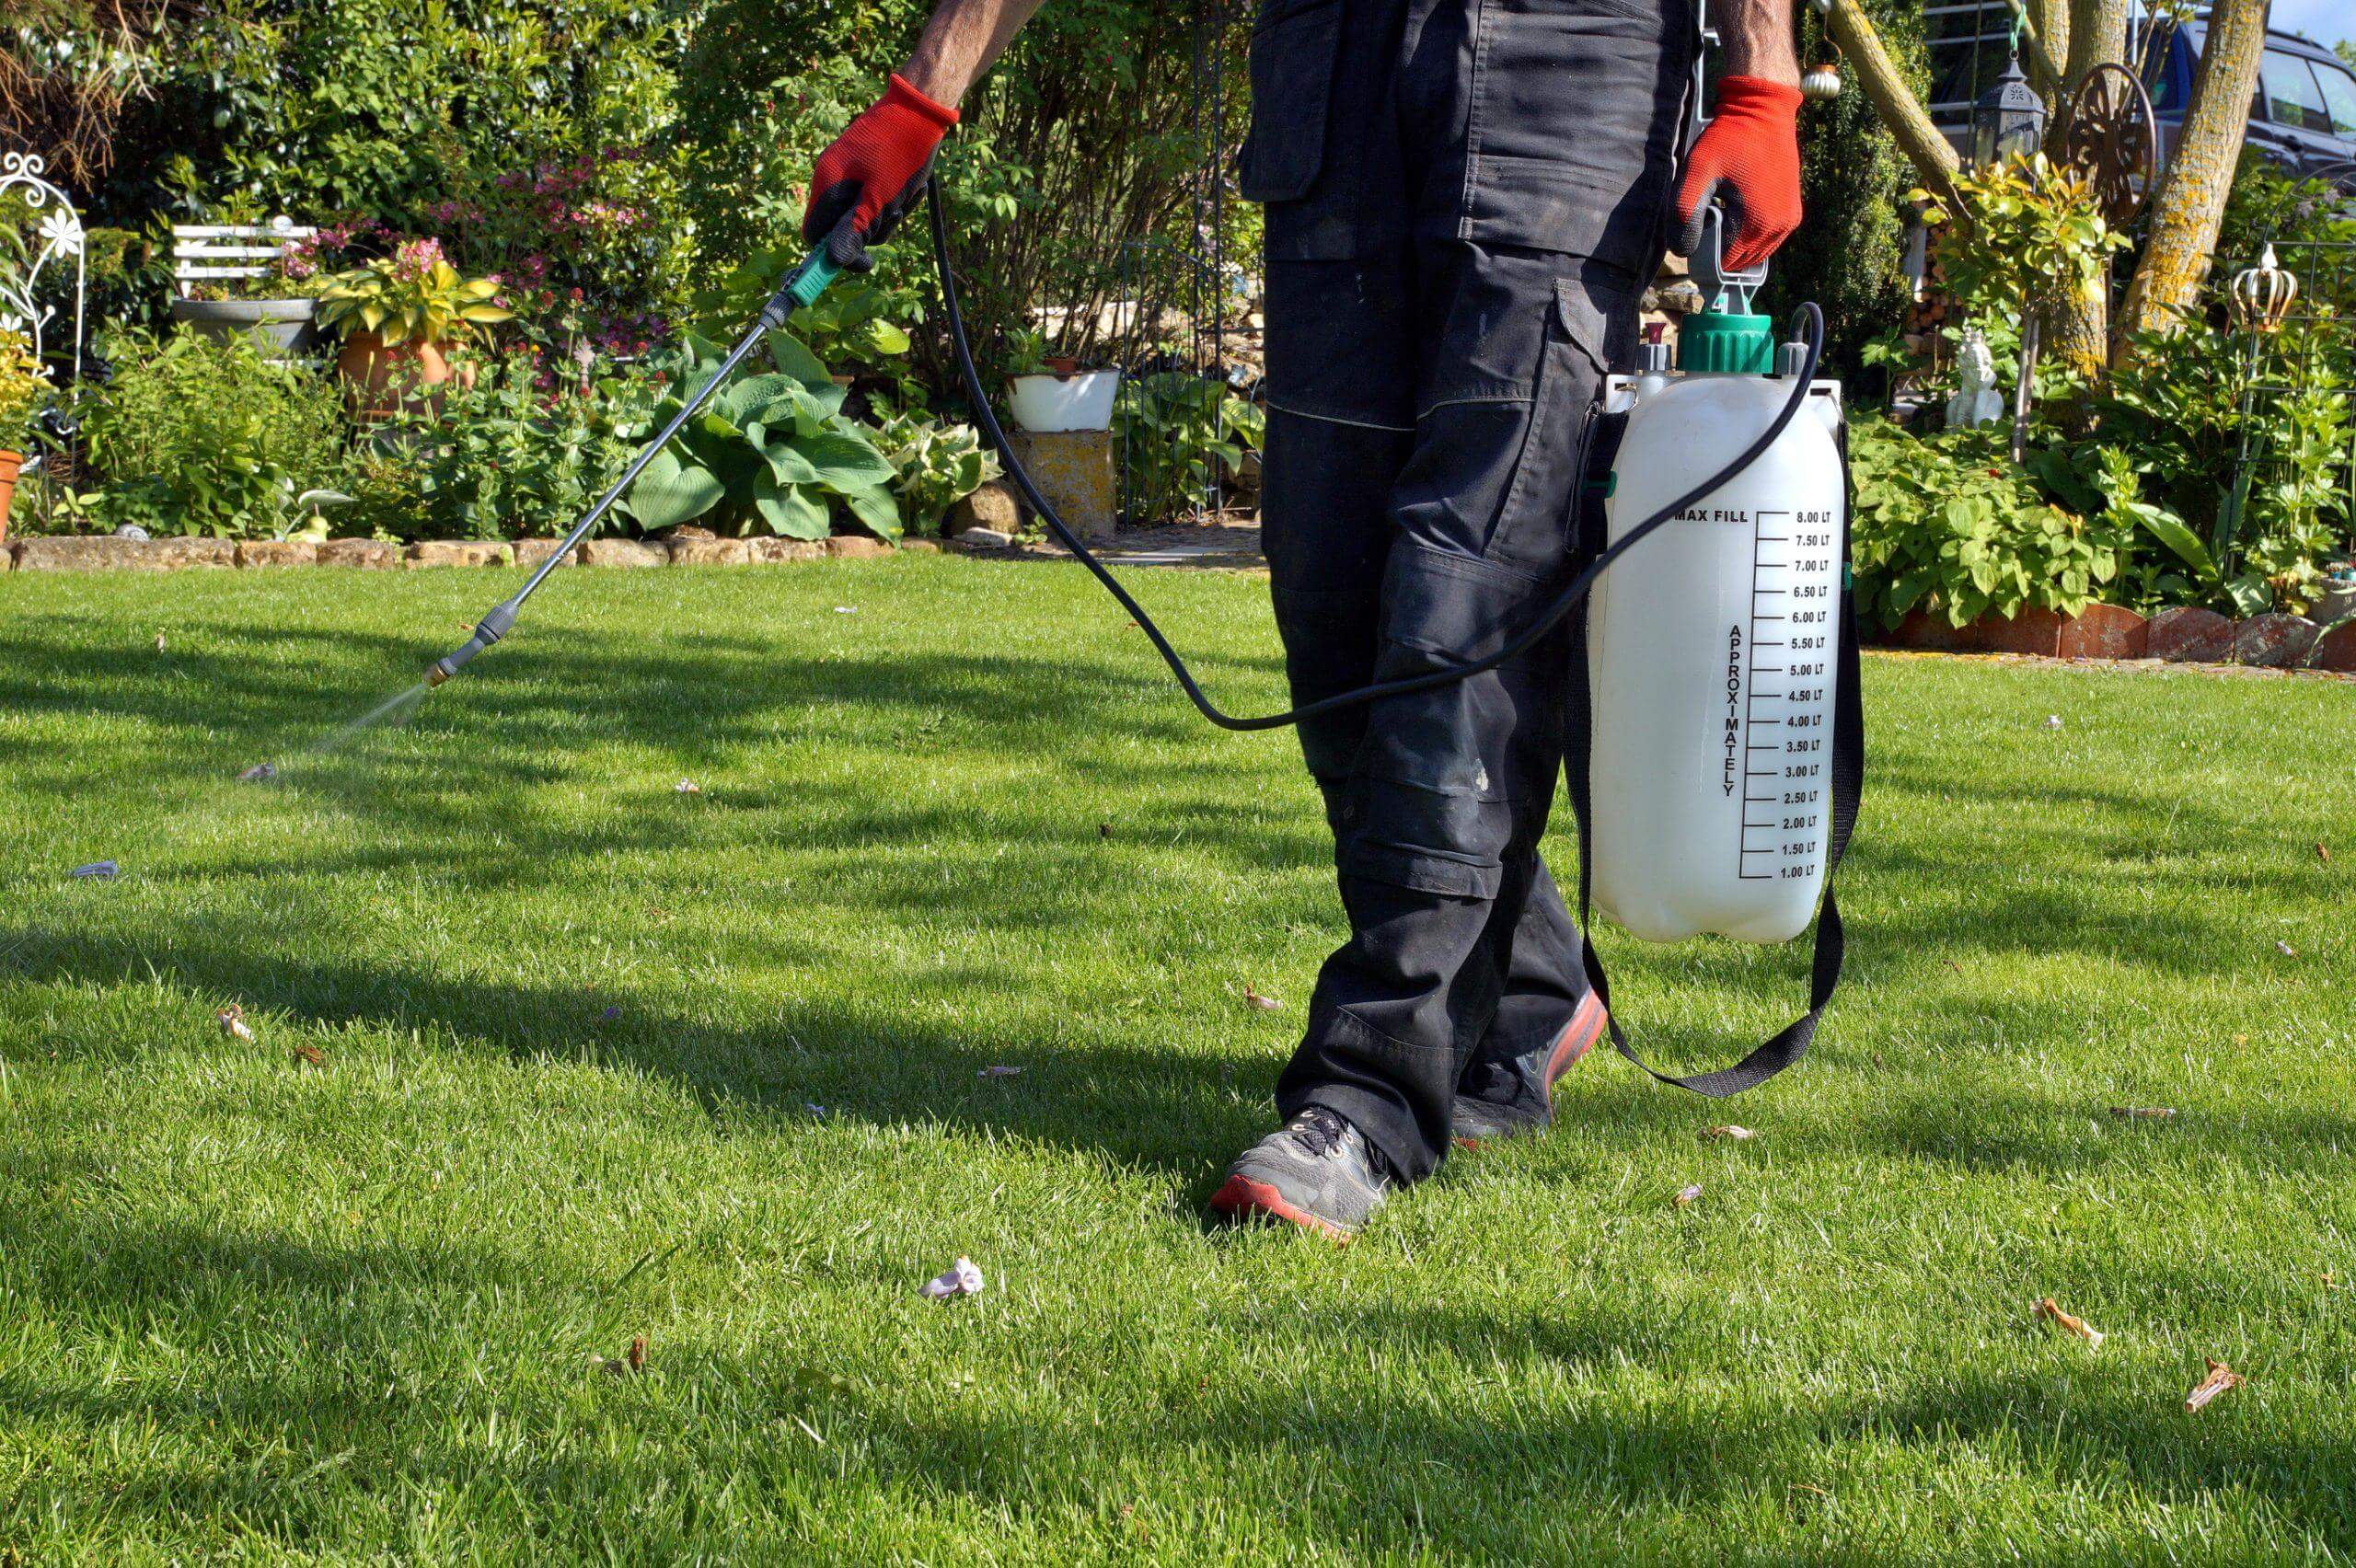 Spraying pesticides with a portable sprayer to eradicate garden weeds in Pesticide use is hazardous to health - pet safe weed killers